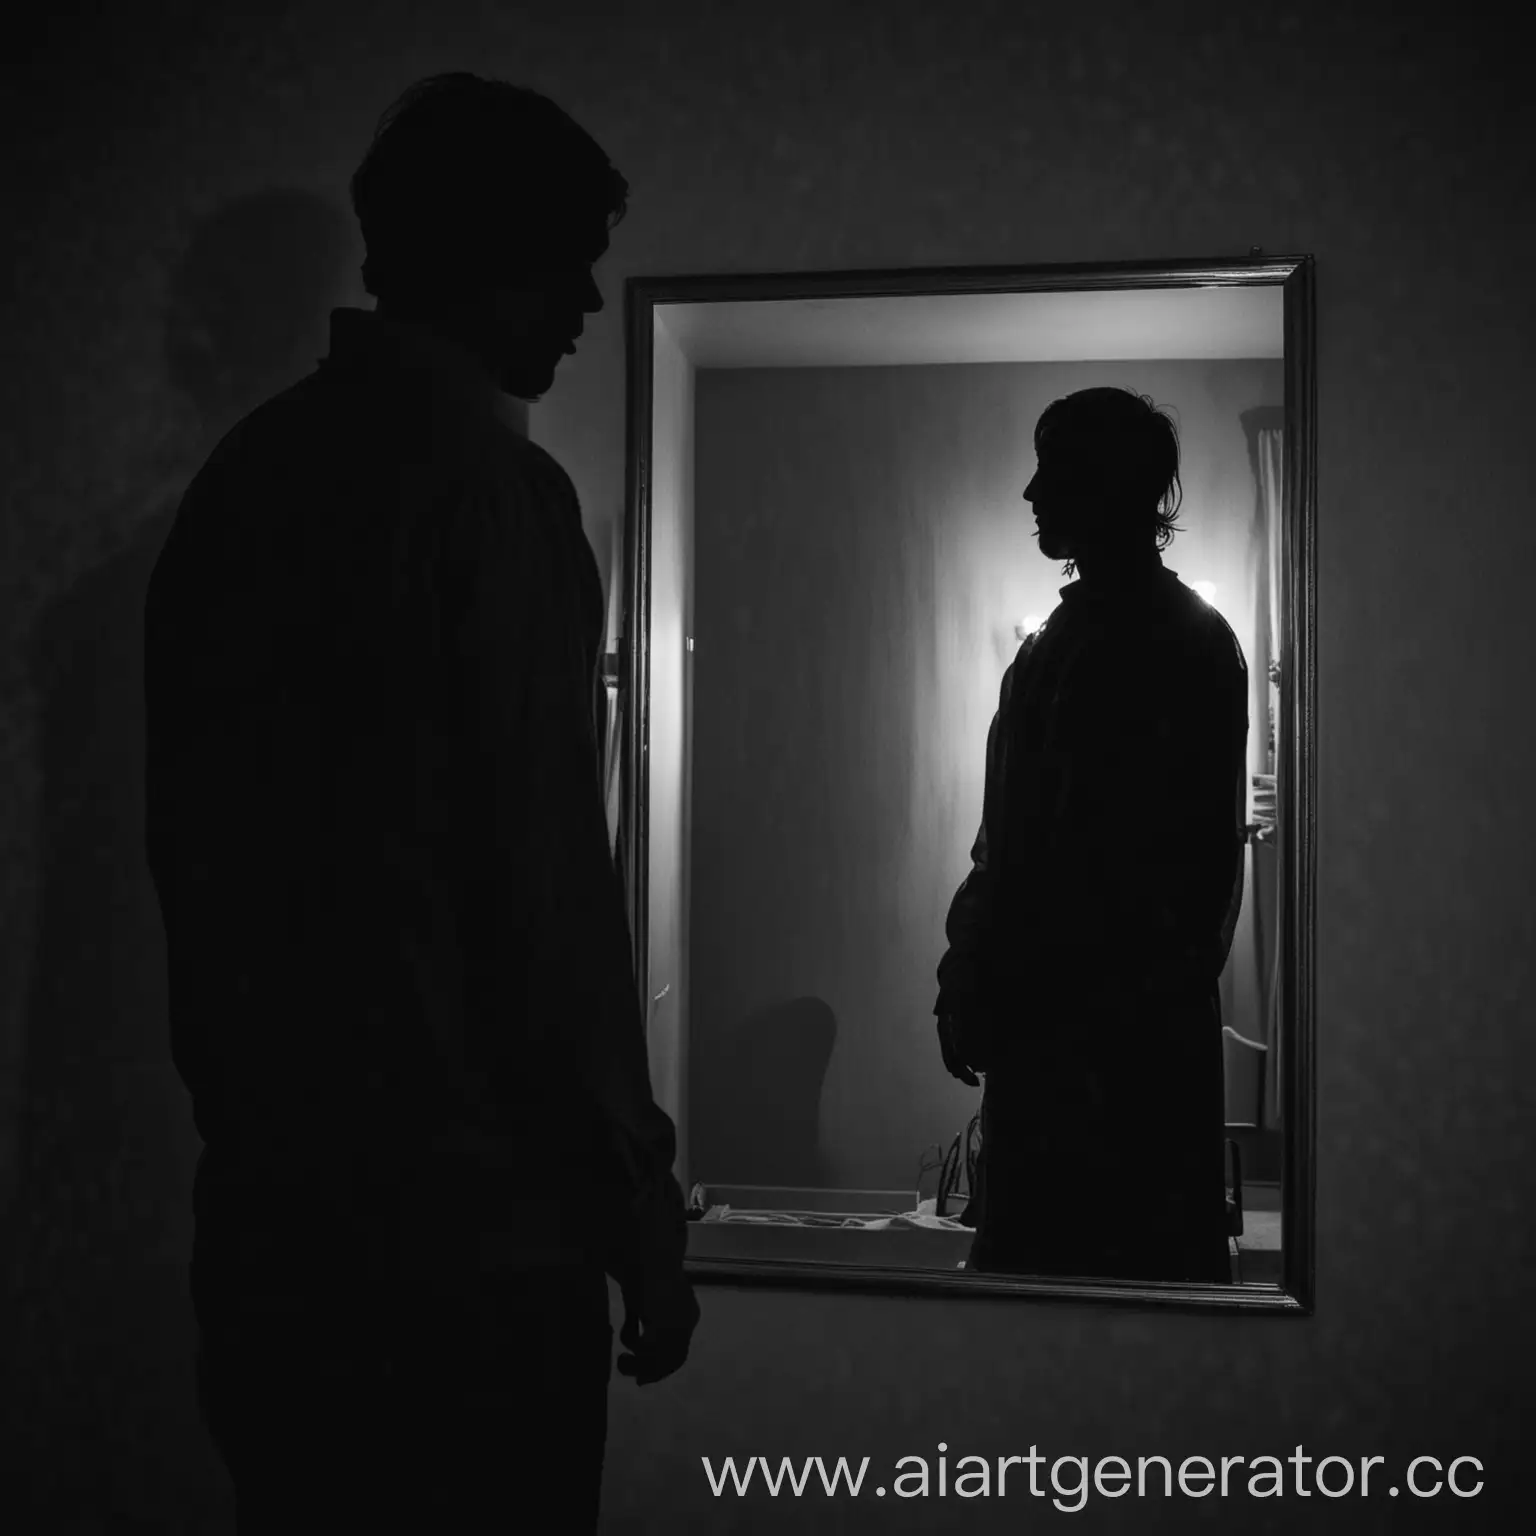 Shadowy-Silhouette-in-Mirror-Dark-and-Scary-Reflection